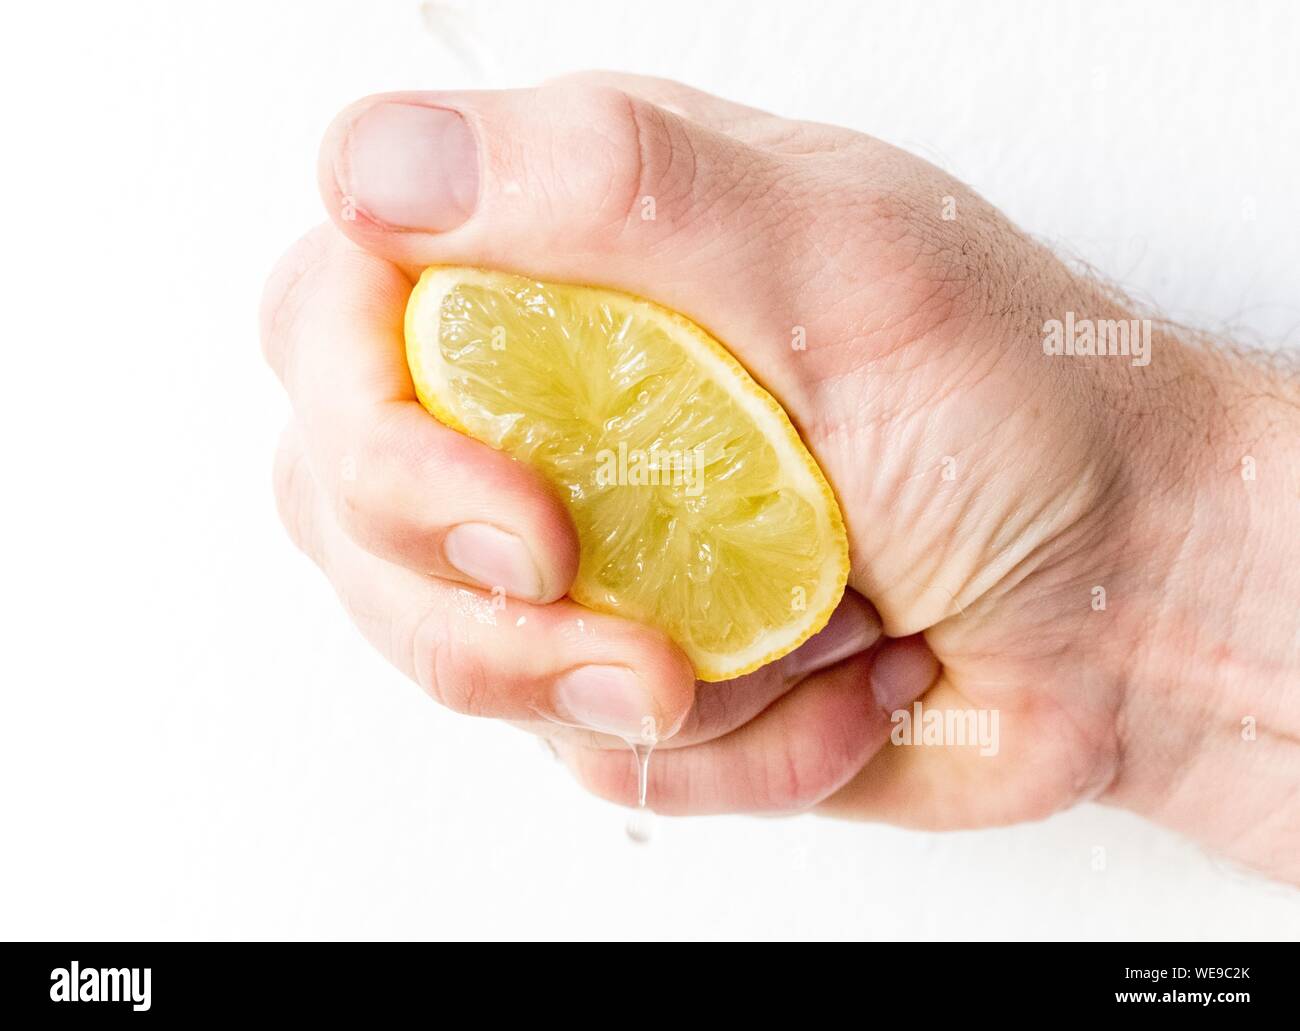 Cropped Hand Of Man Squeezing Lemon Stock Photo